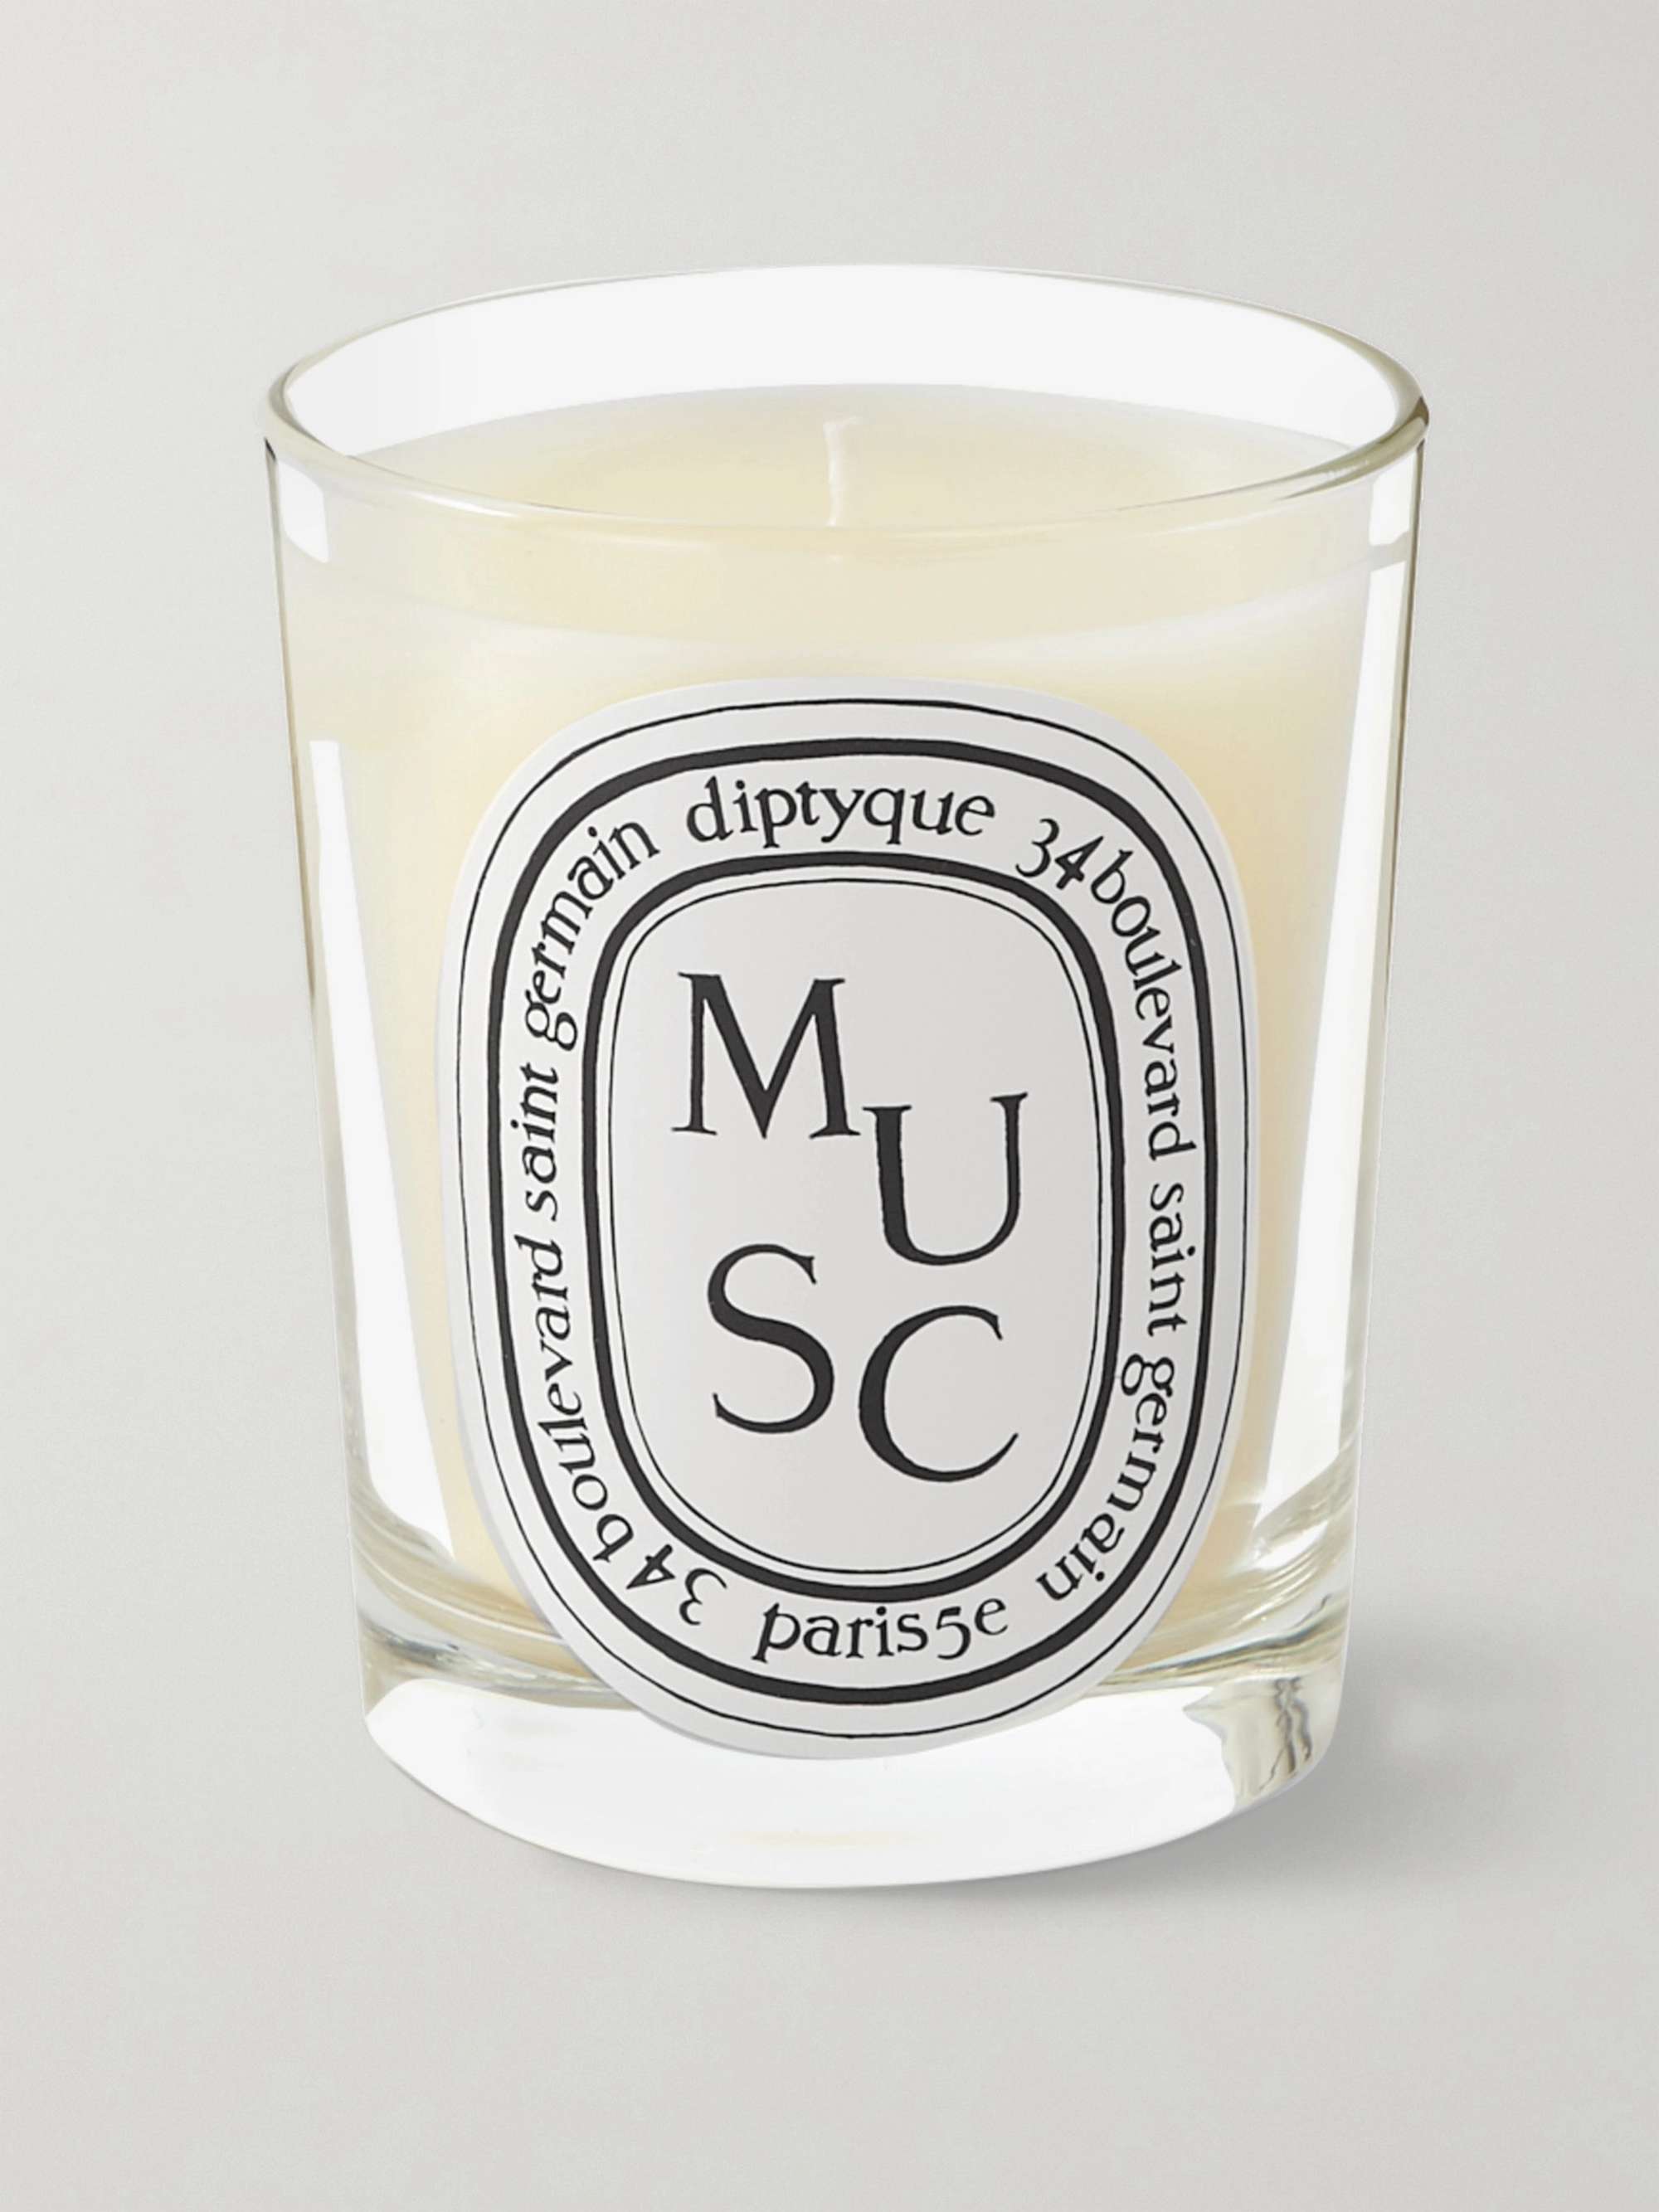 DIPTYQUE Musc Scented Candle, 190g